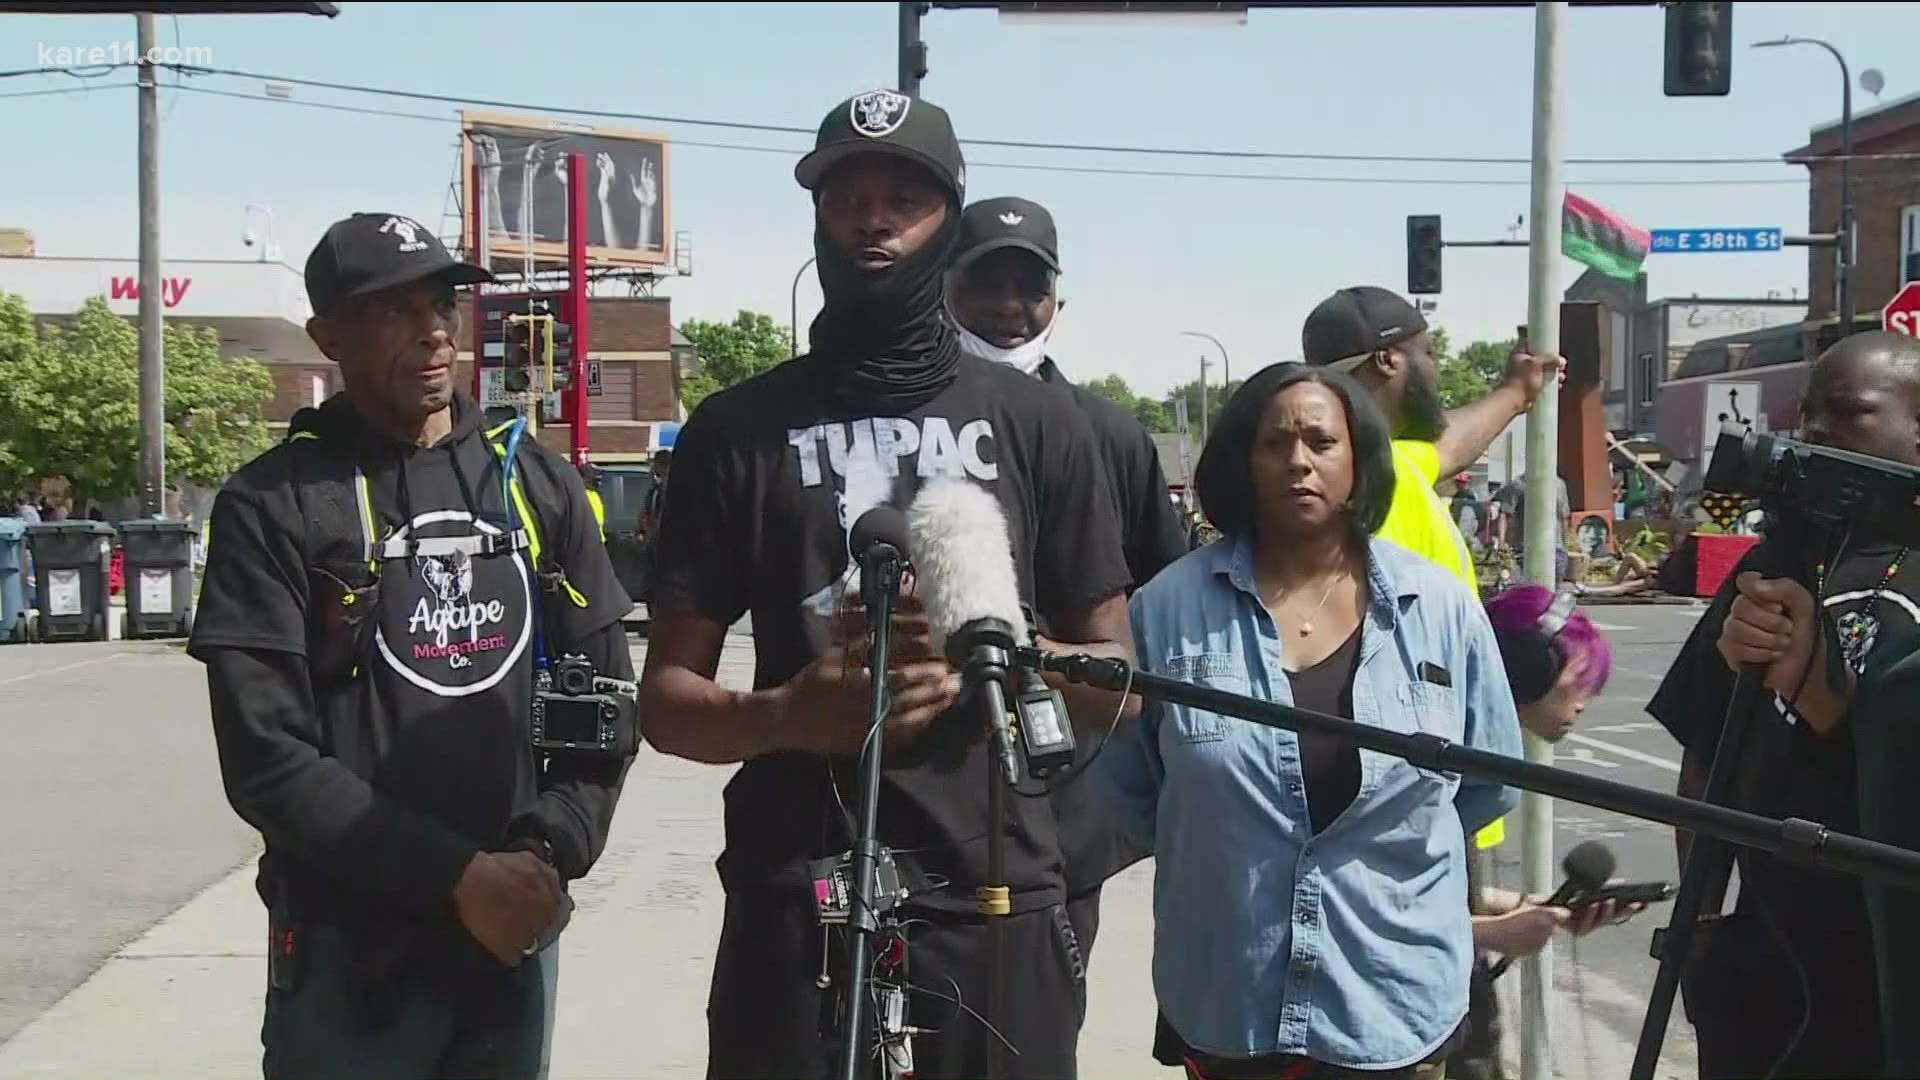 Since George Floyd's murder, members of The Agape Movement have been at 38th and Chicago. Now they're at the center of a push to reopen the area to traffic